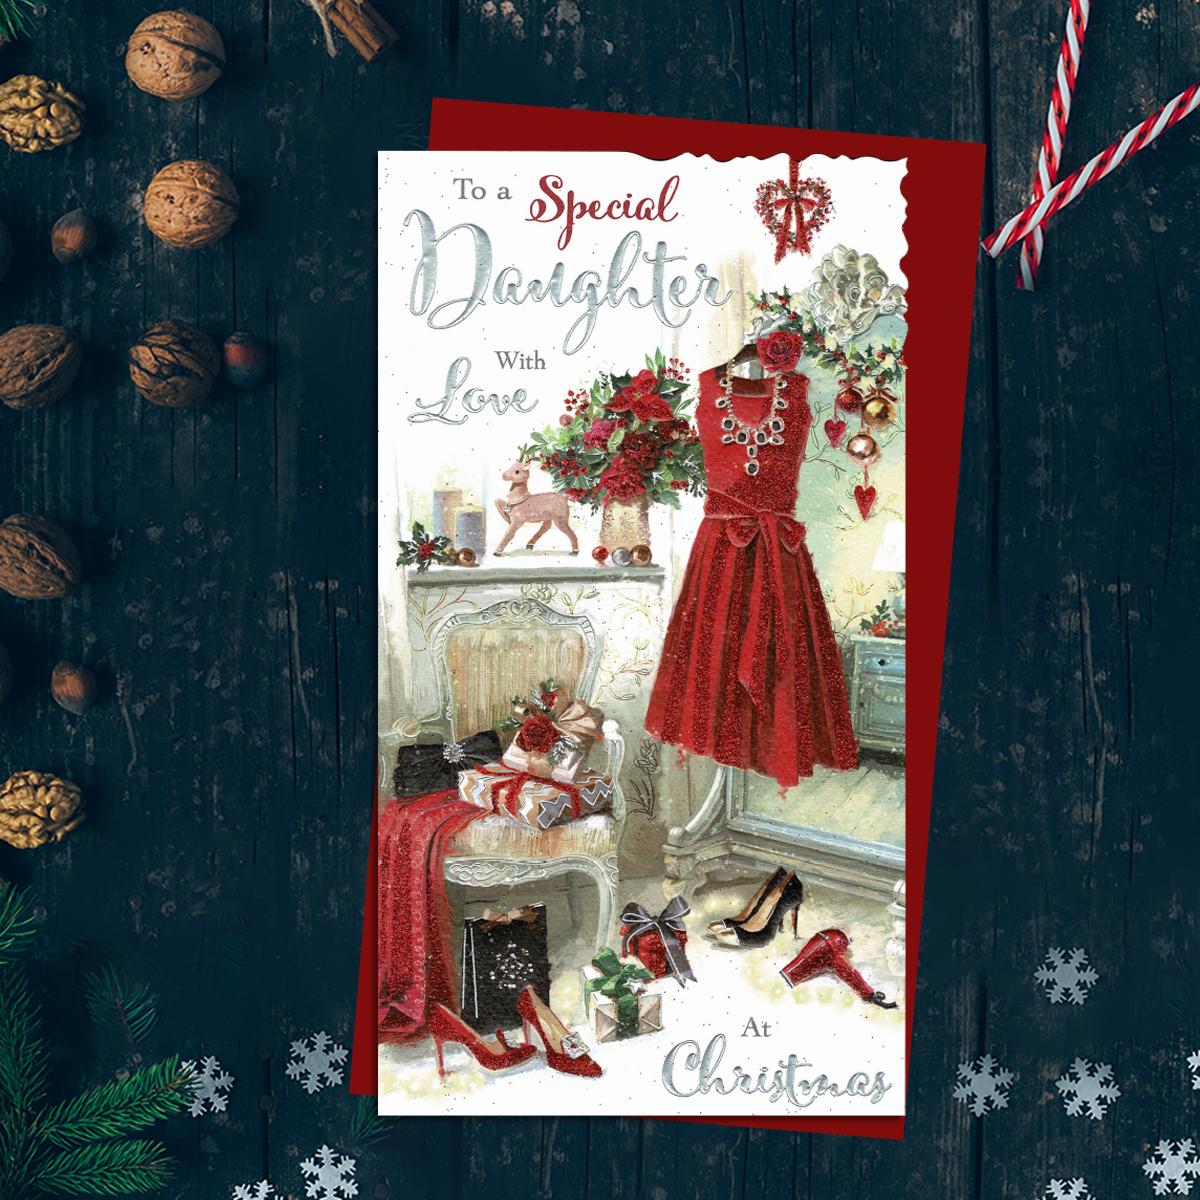 To A Special Daughter With Love At Christmas Featuring A Dressing Room With Beautiful Red Sparkly Dress, Shoes, Poinsettias And Gifts. Finished With Silver Foil And Red Glitter Detail And Red Envelope